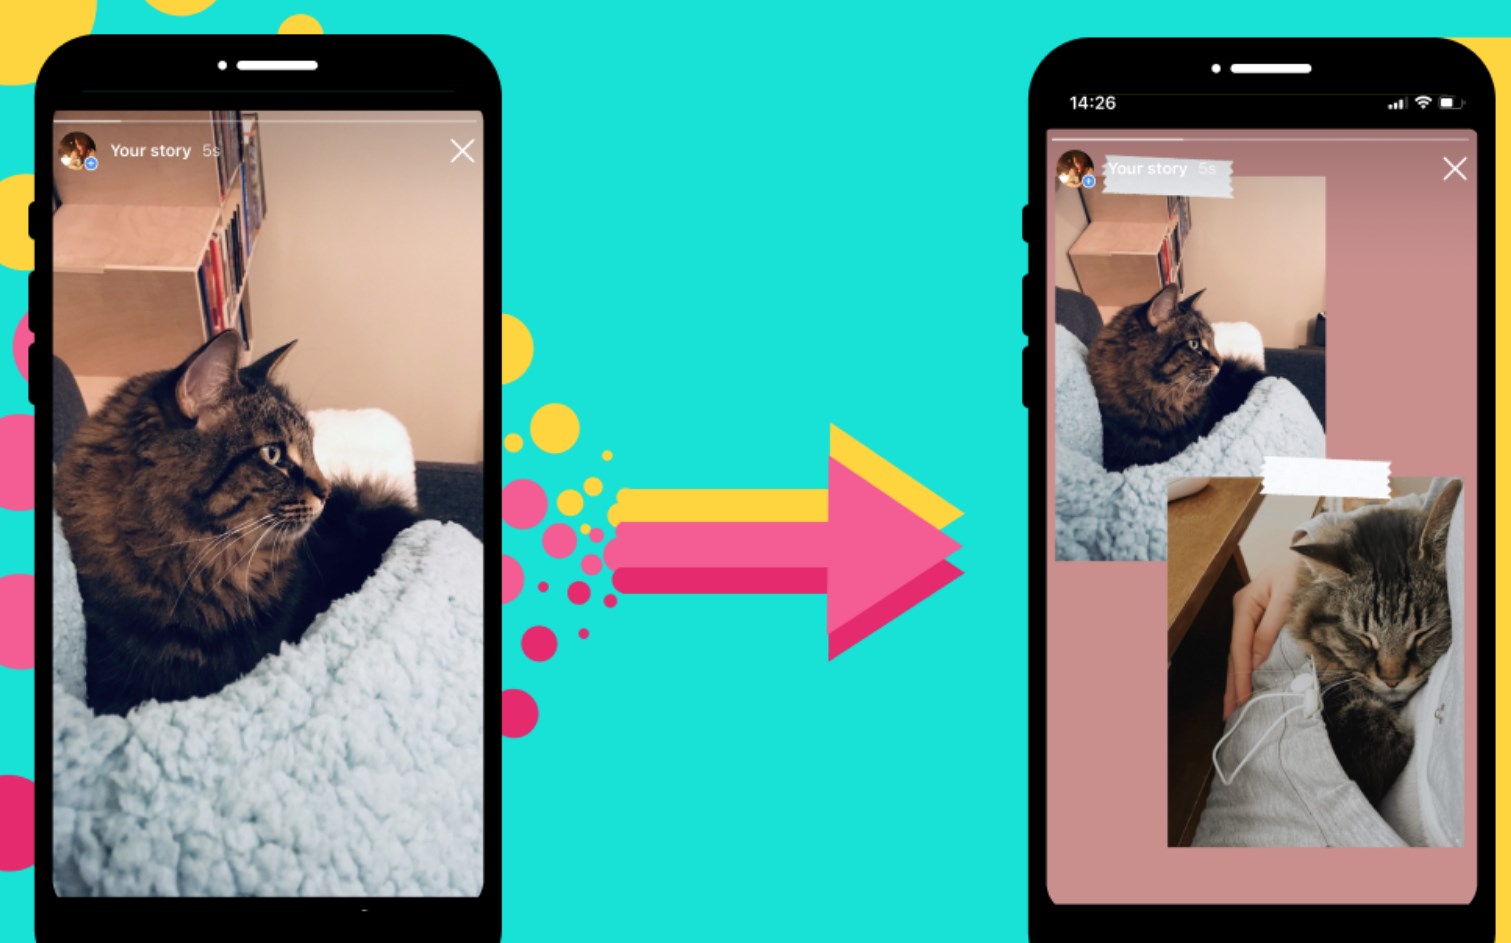 How to Add Multiple Photos to Instagram Story